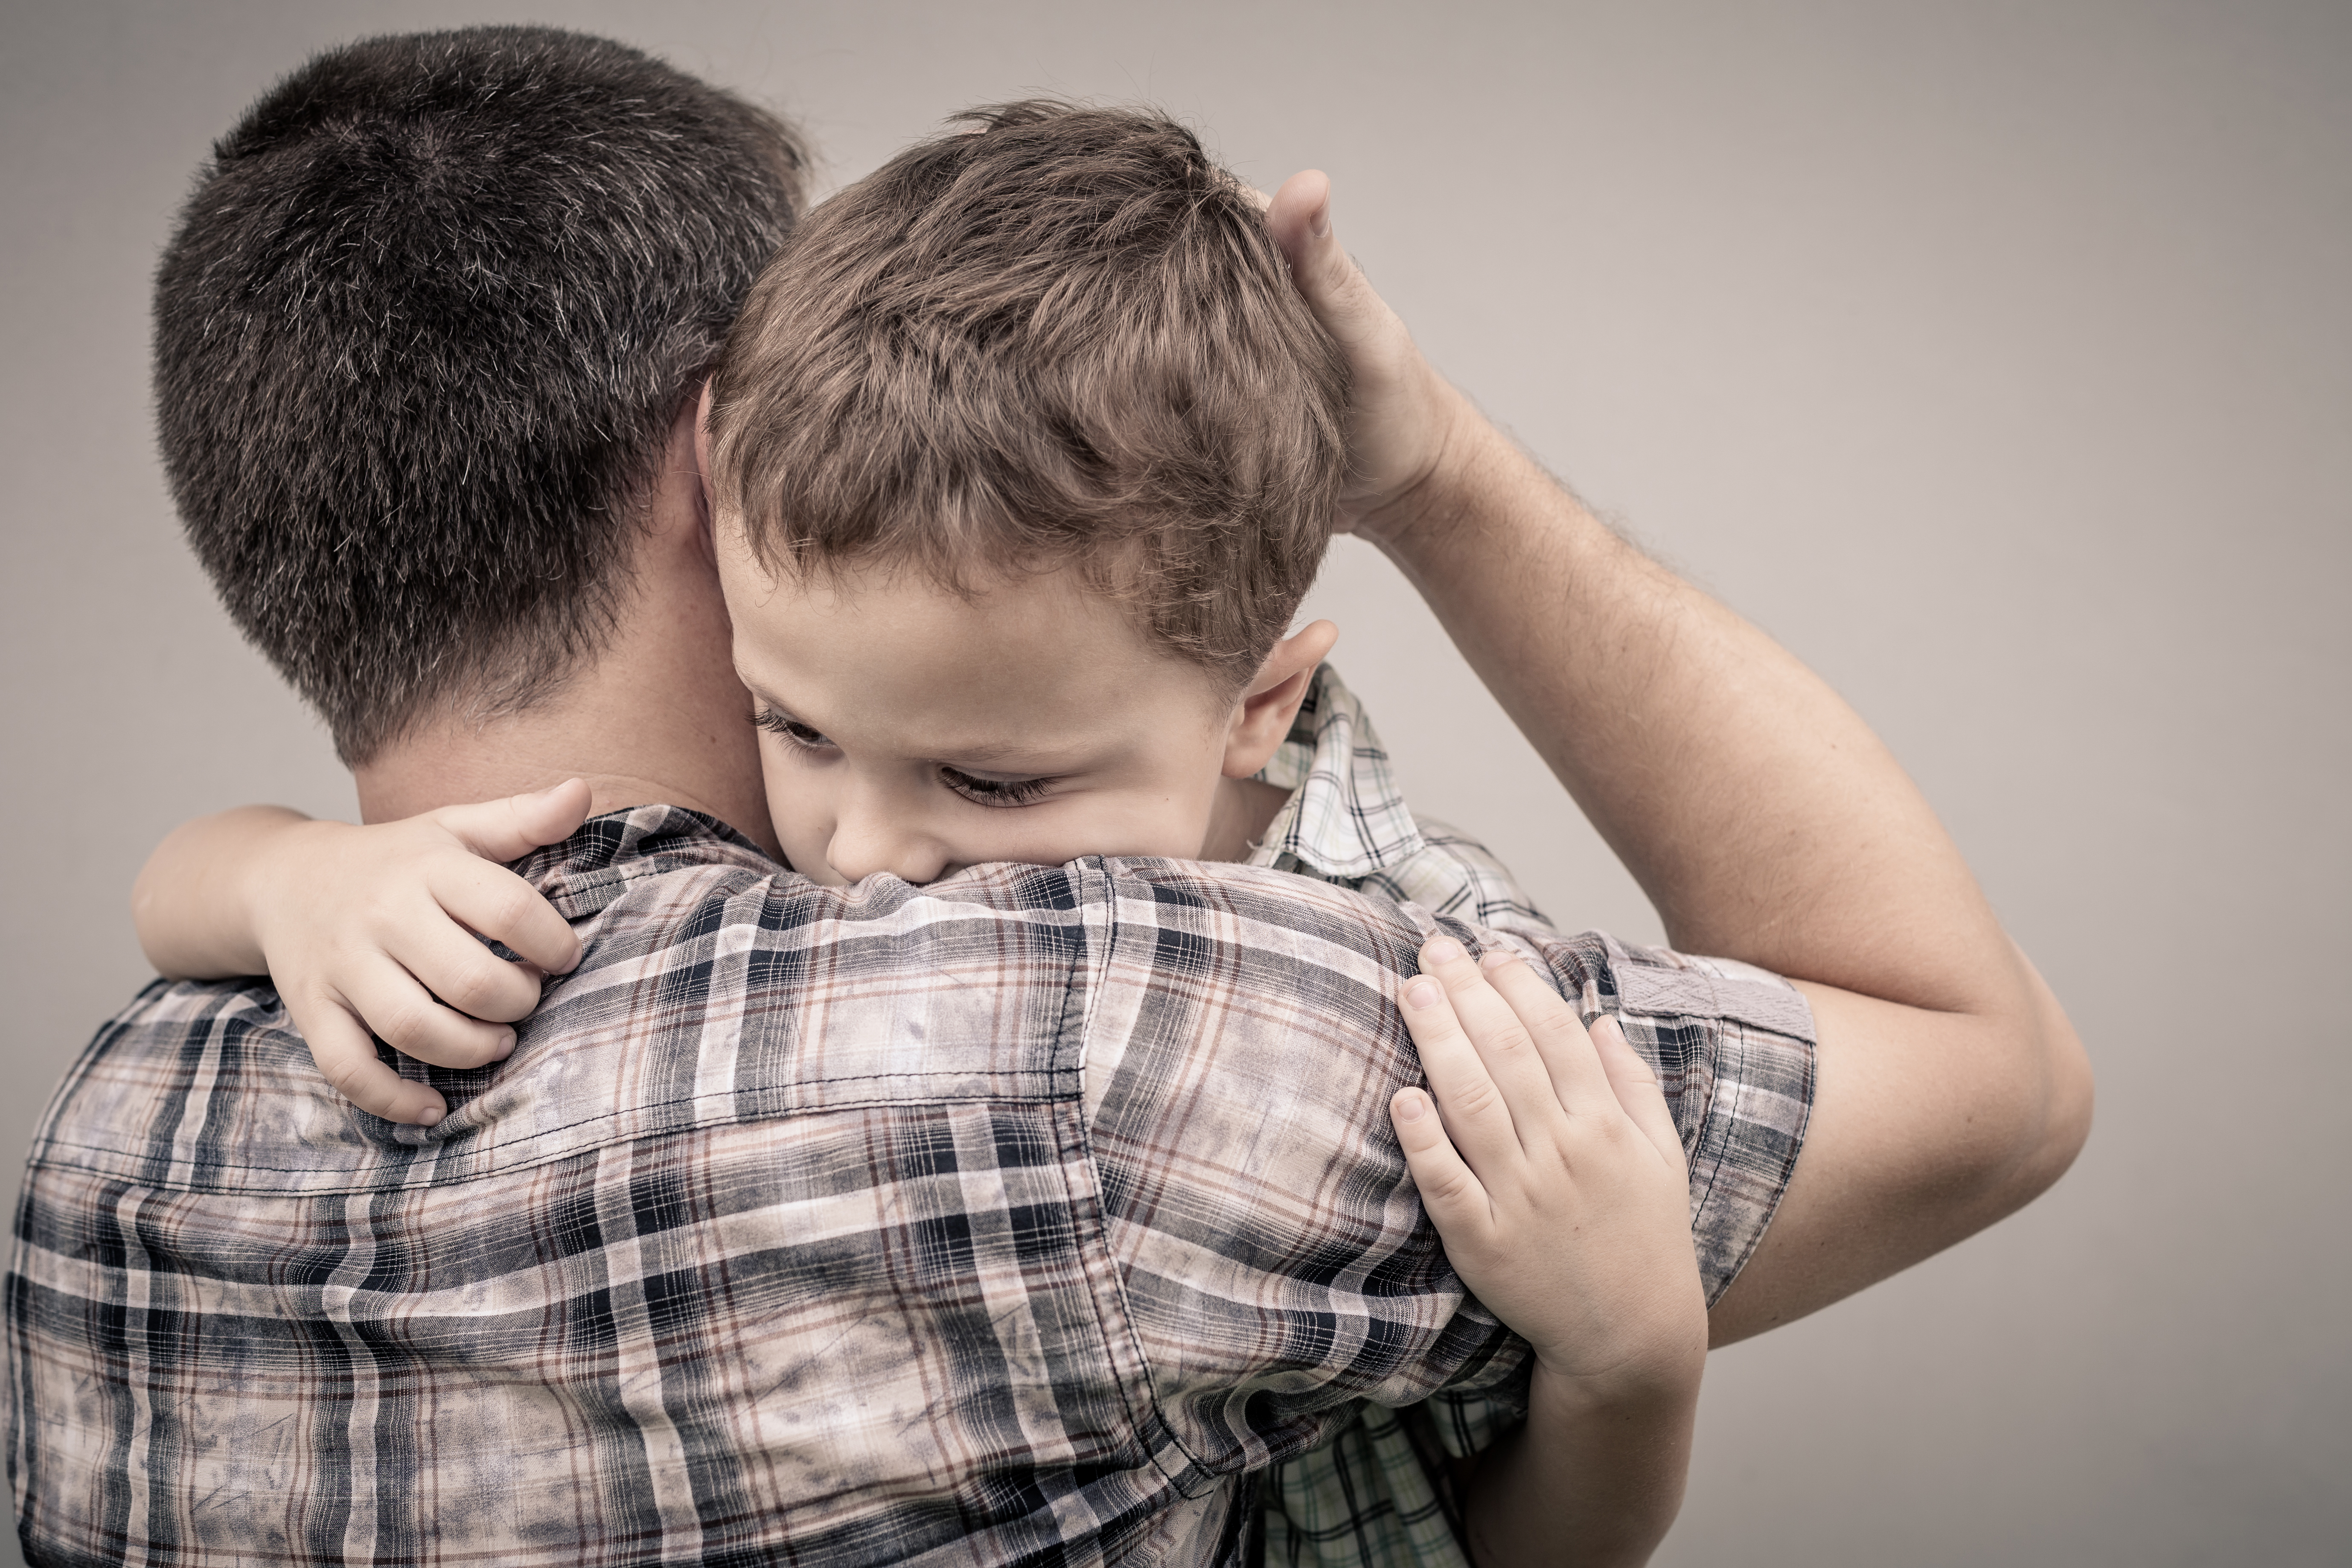 A father hugging his young son | Source: Shutterstock